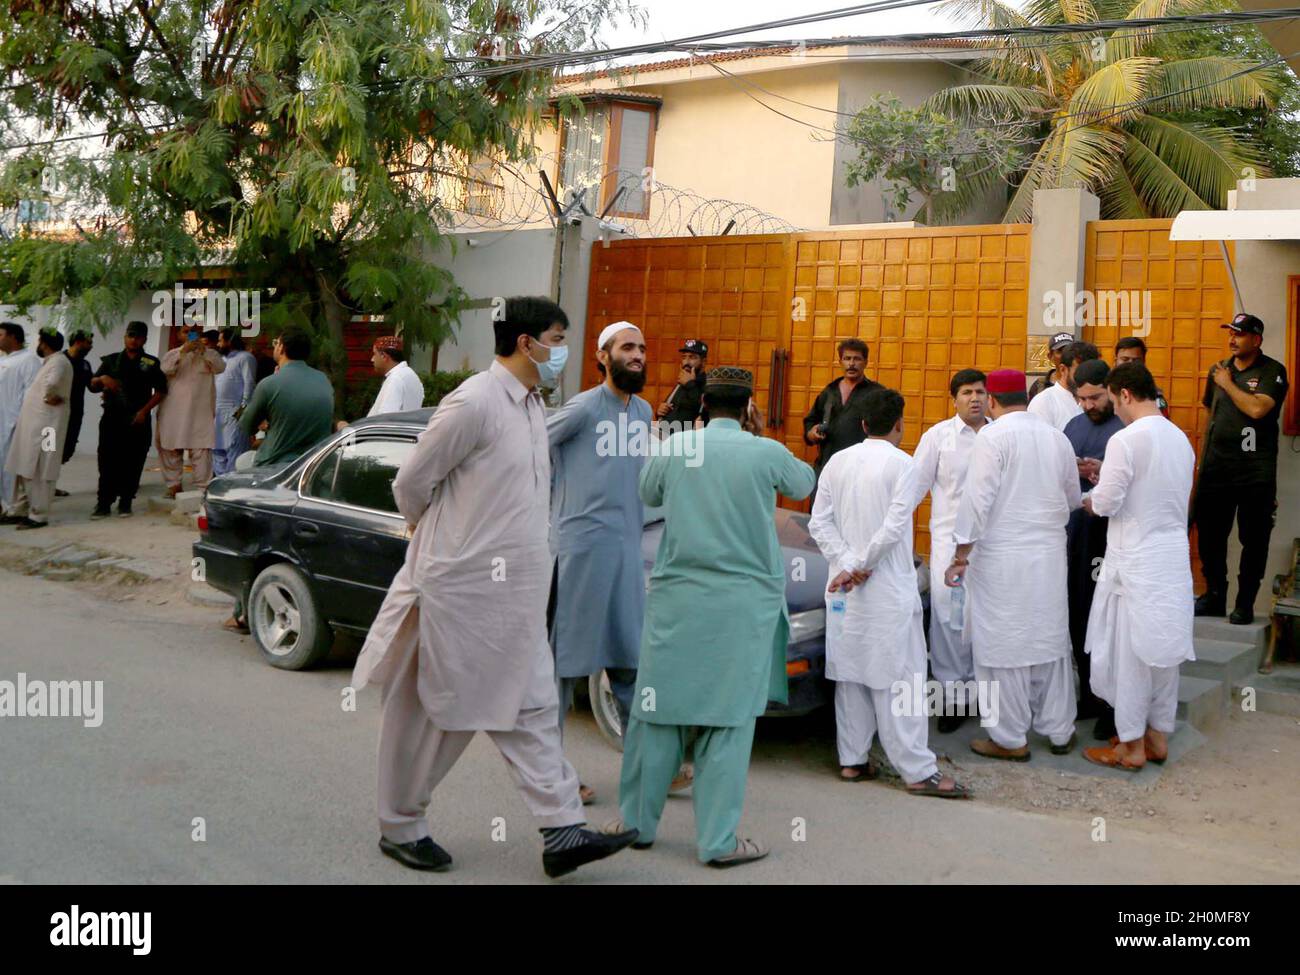 National Accountability Bureau (NAB) Karachi team officials raid the residence of Sindh Assembly Speaker Agha Siraj Durrani, seeking his arrest after the Sindh High Court rejected his plea for bail, located on DHA area of Karachi on Wednesday, October 13, 2021. Two special teams have been formed to take Durrani into custody after the Sindh High Court rejected his plea for bail, along with requests filed by 10 other individuals. NAB for allegedly owning assets beyond known sources of income case. Stock Photo